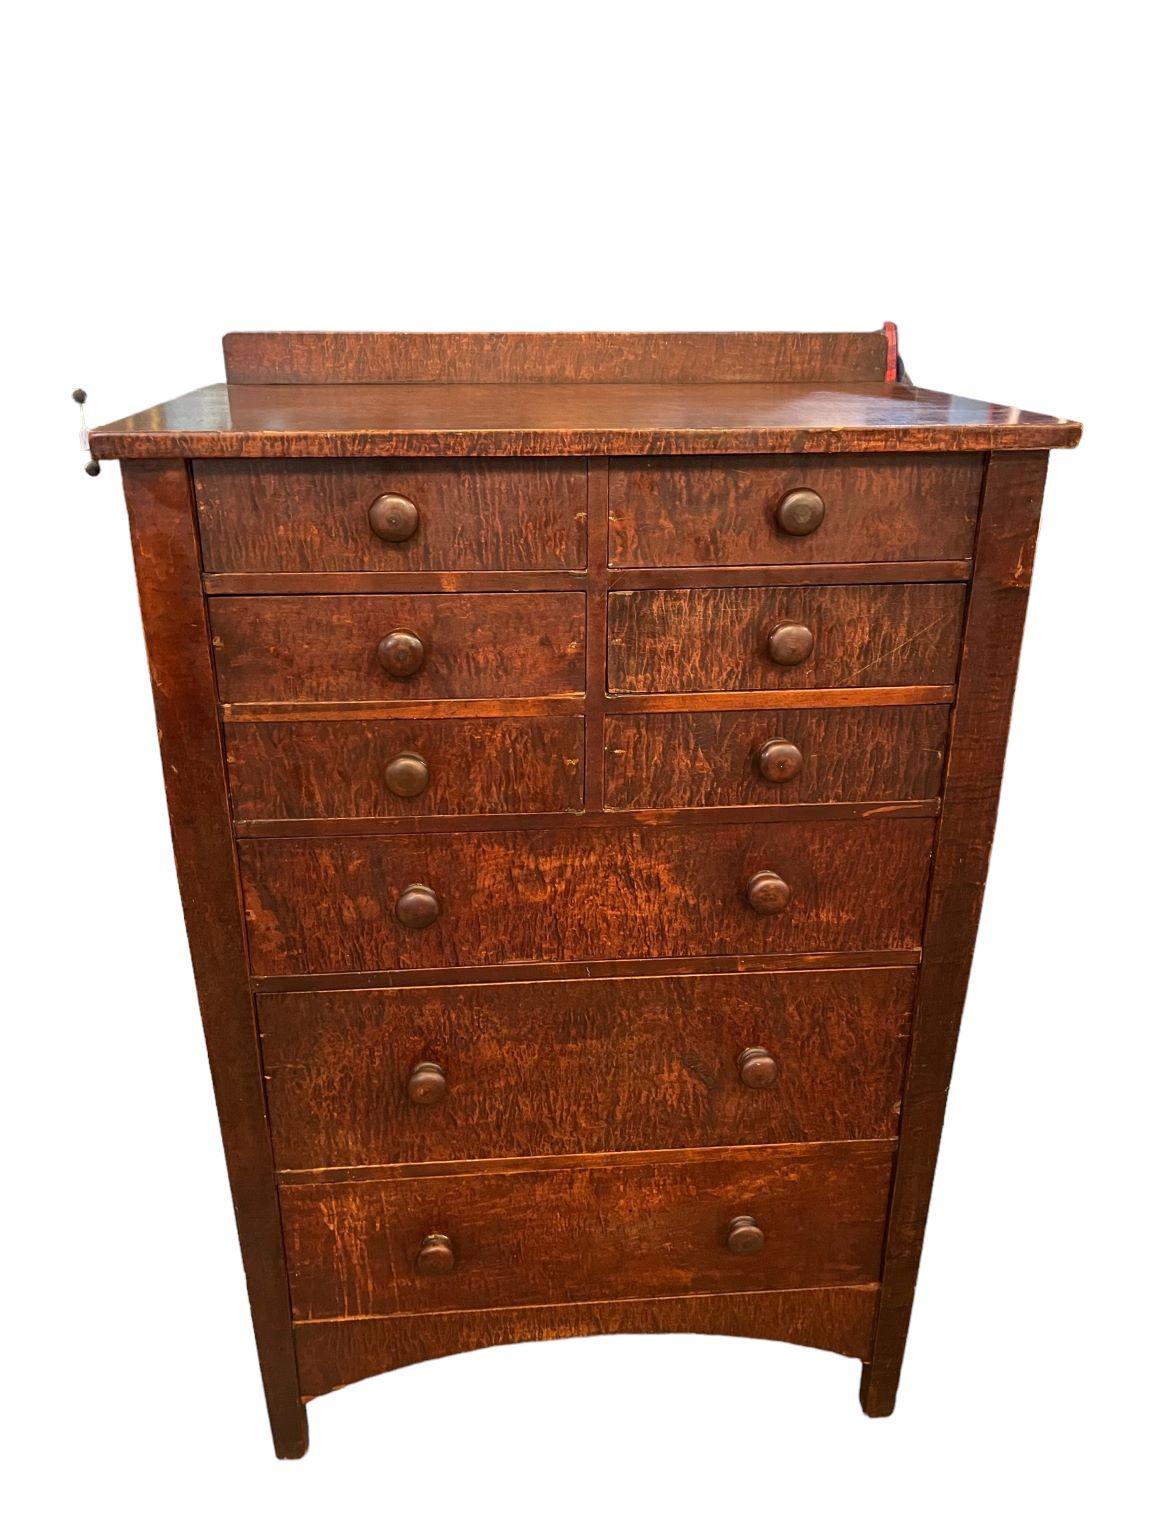 Curly Maple Chest For Gustav Stickley Attributed to Harvey Ellis C.1900’s 2